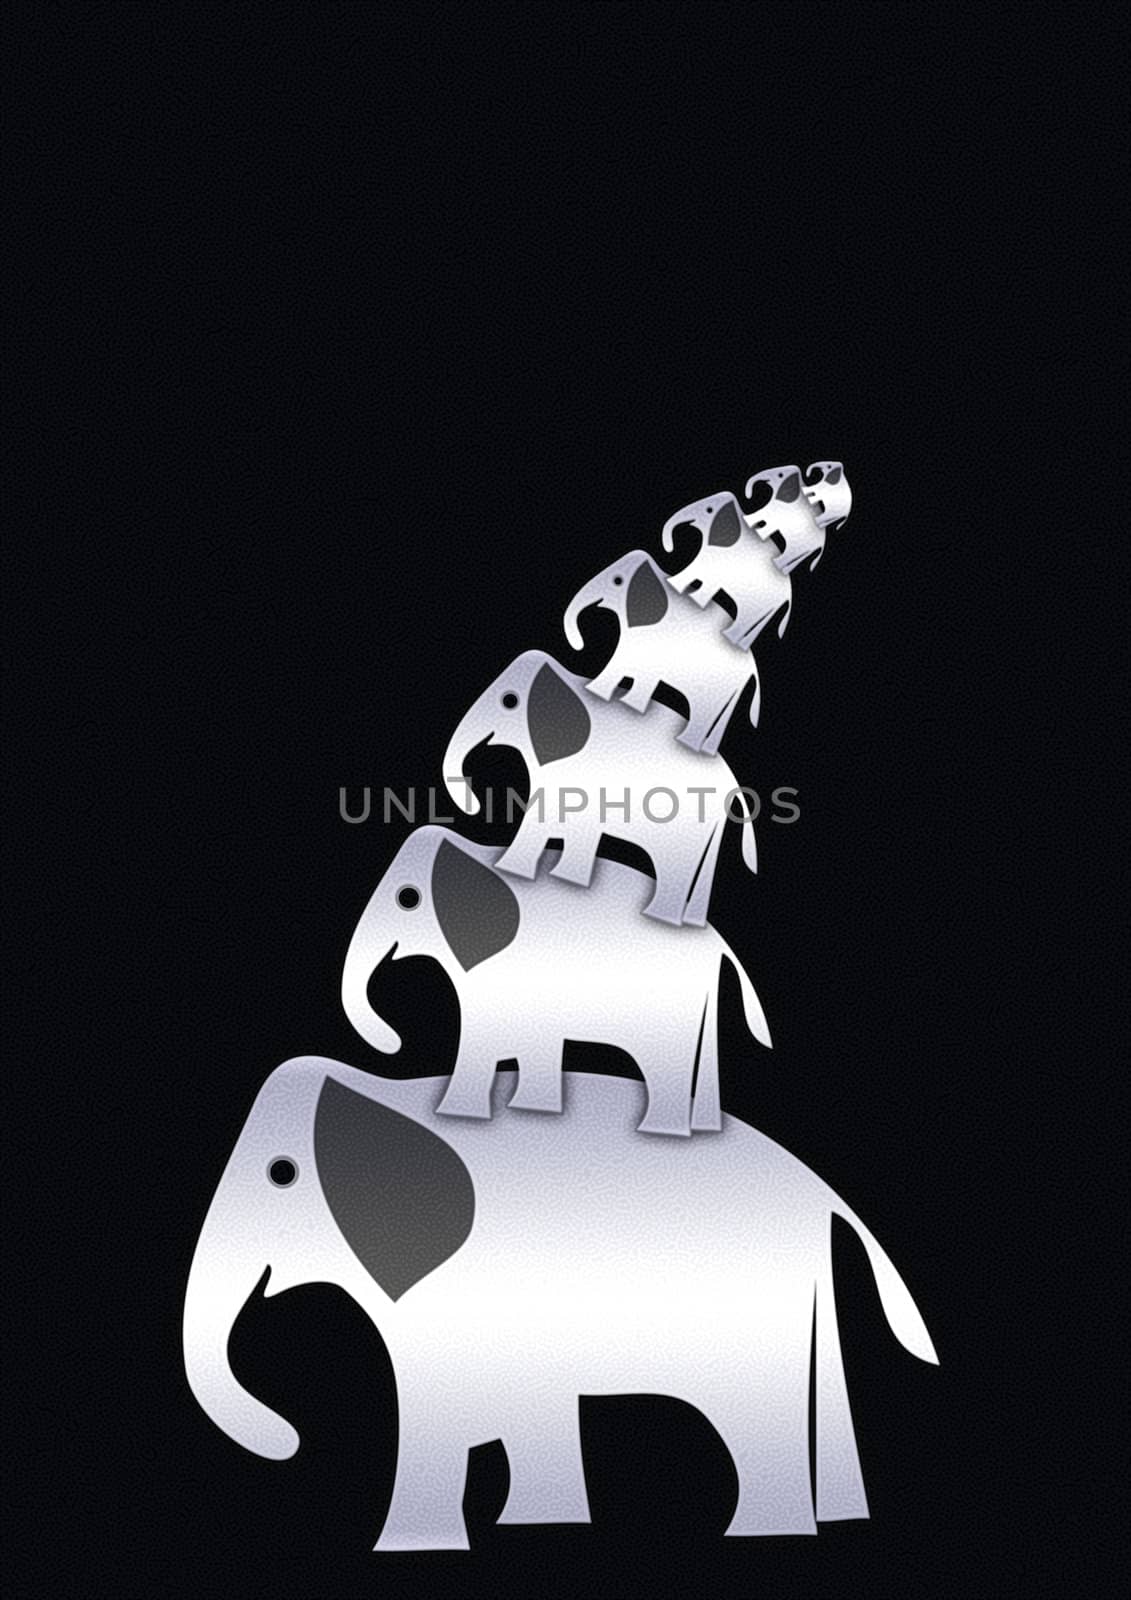 abstract creative symbolic comic image of ornamental elephants facing each other